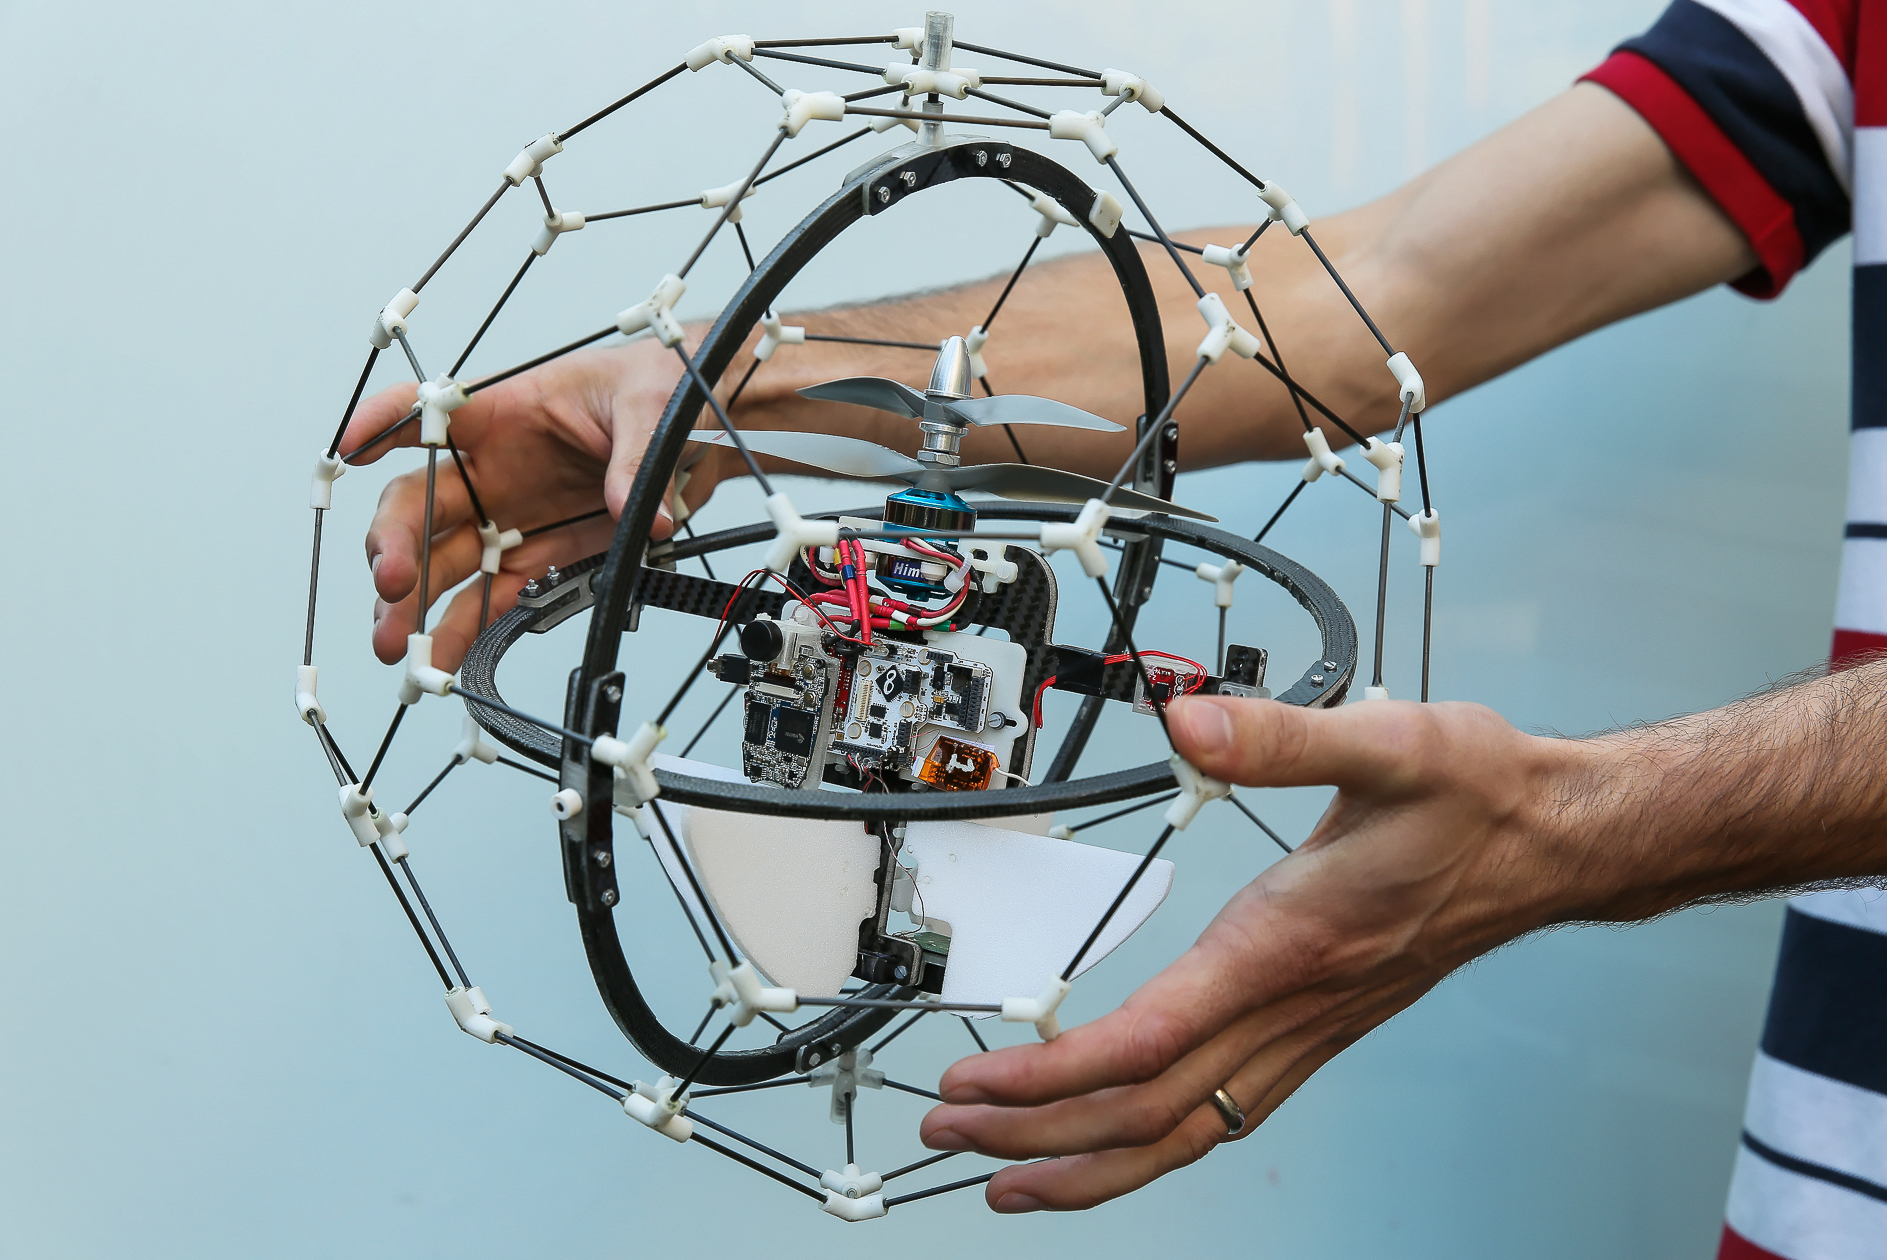 Drones for Good Announces Gimball as Winner of $1 Million Prize